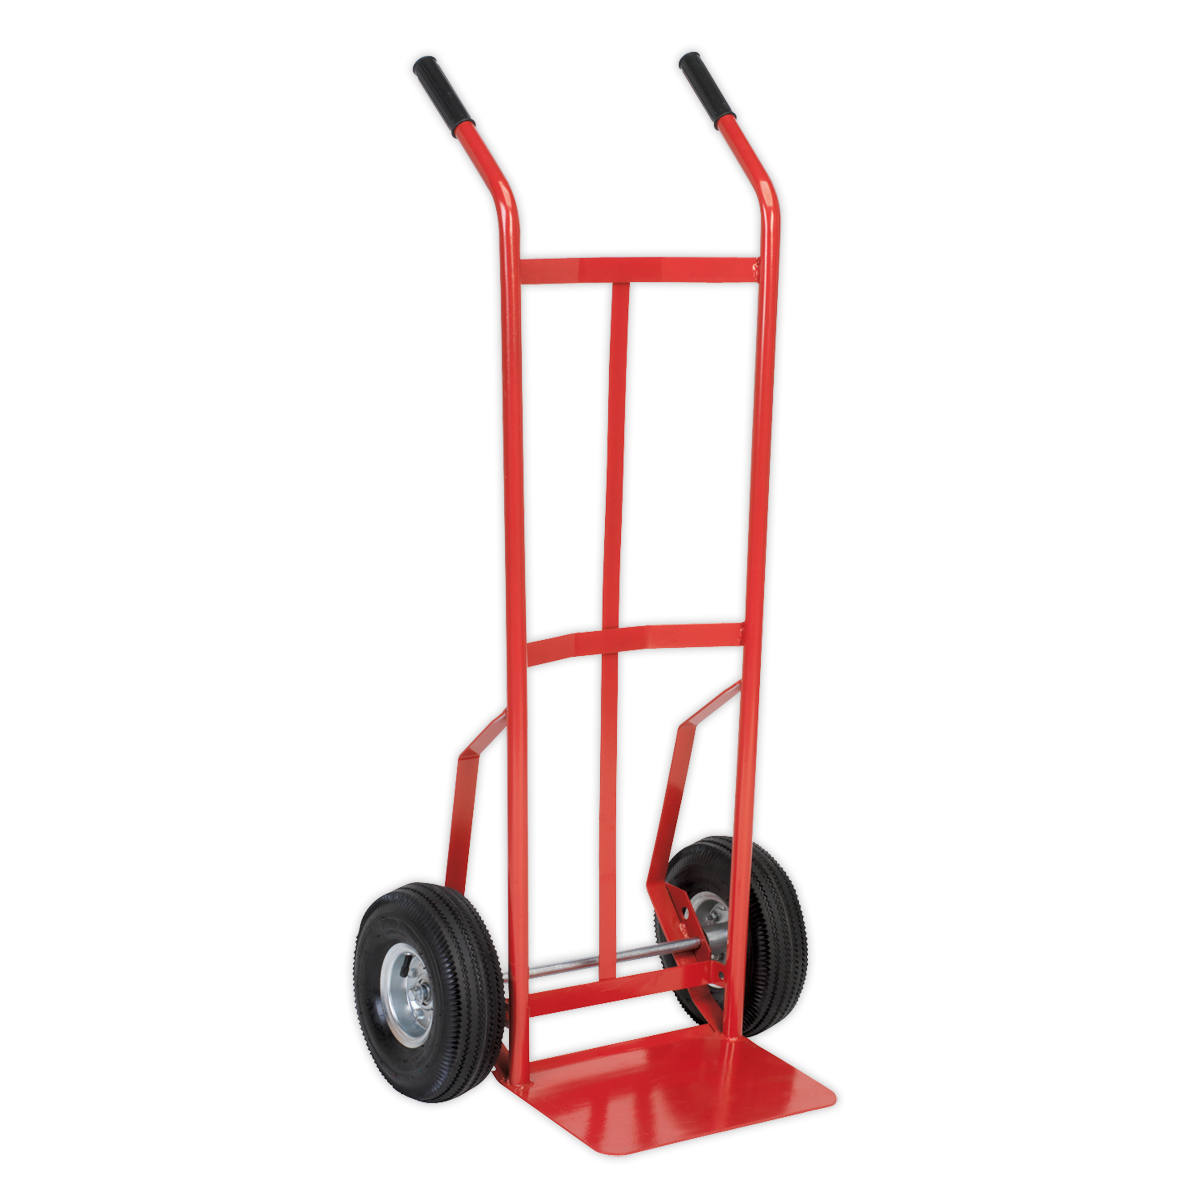 Sack Truck with Pneumatic Tyres 200kg Capacity